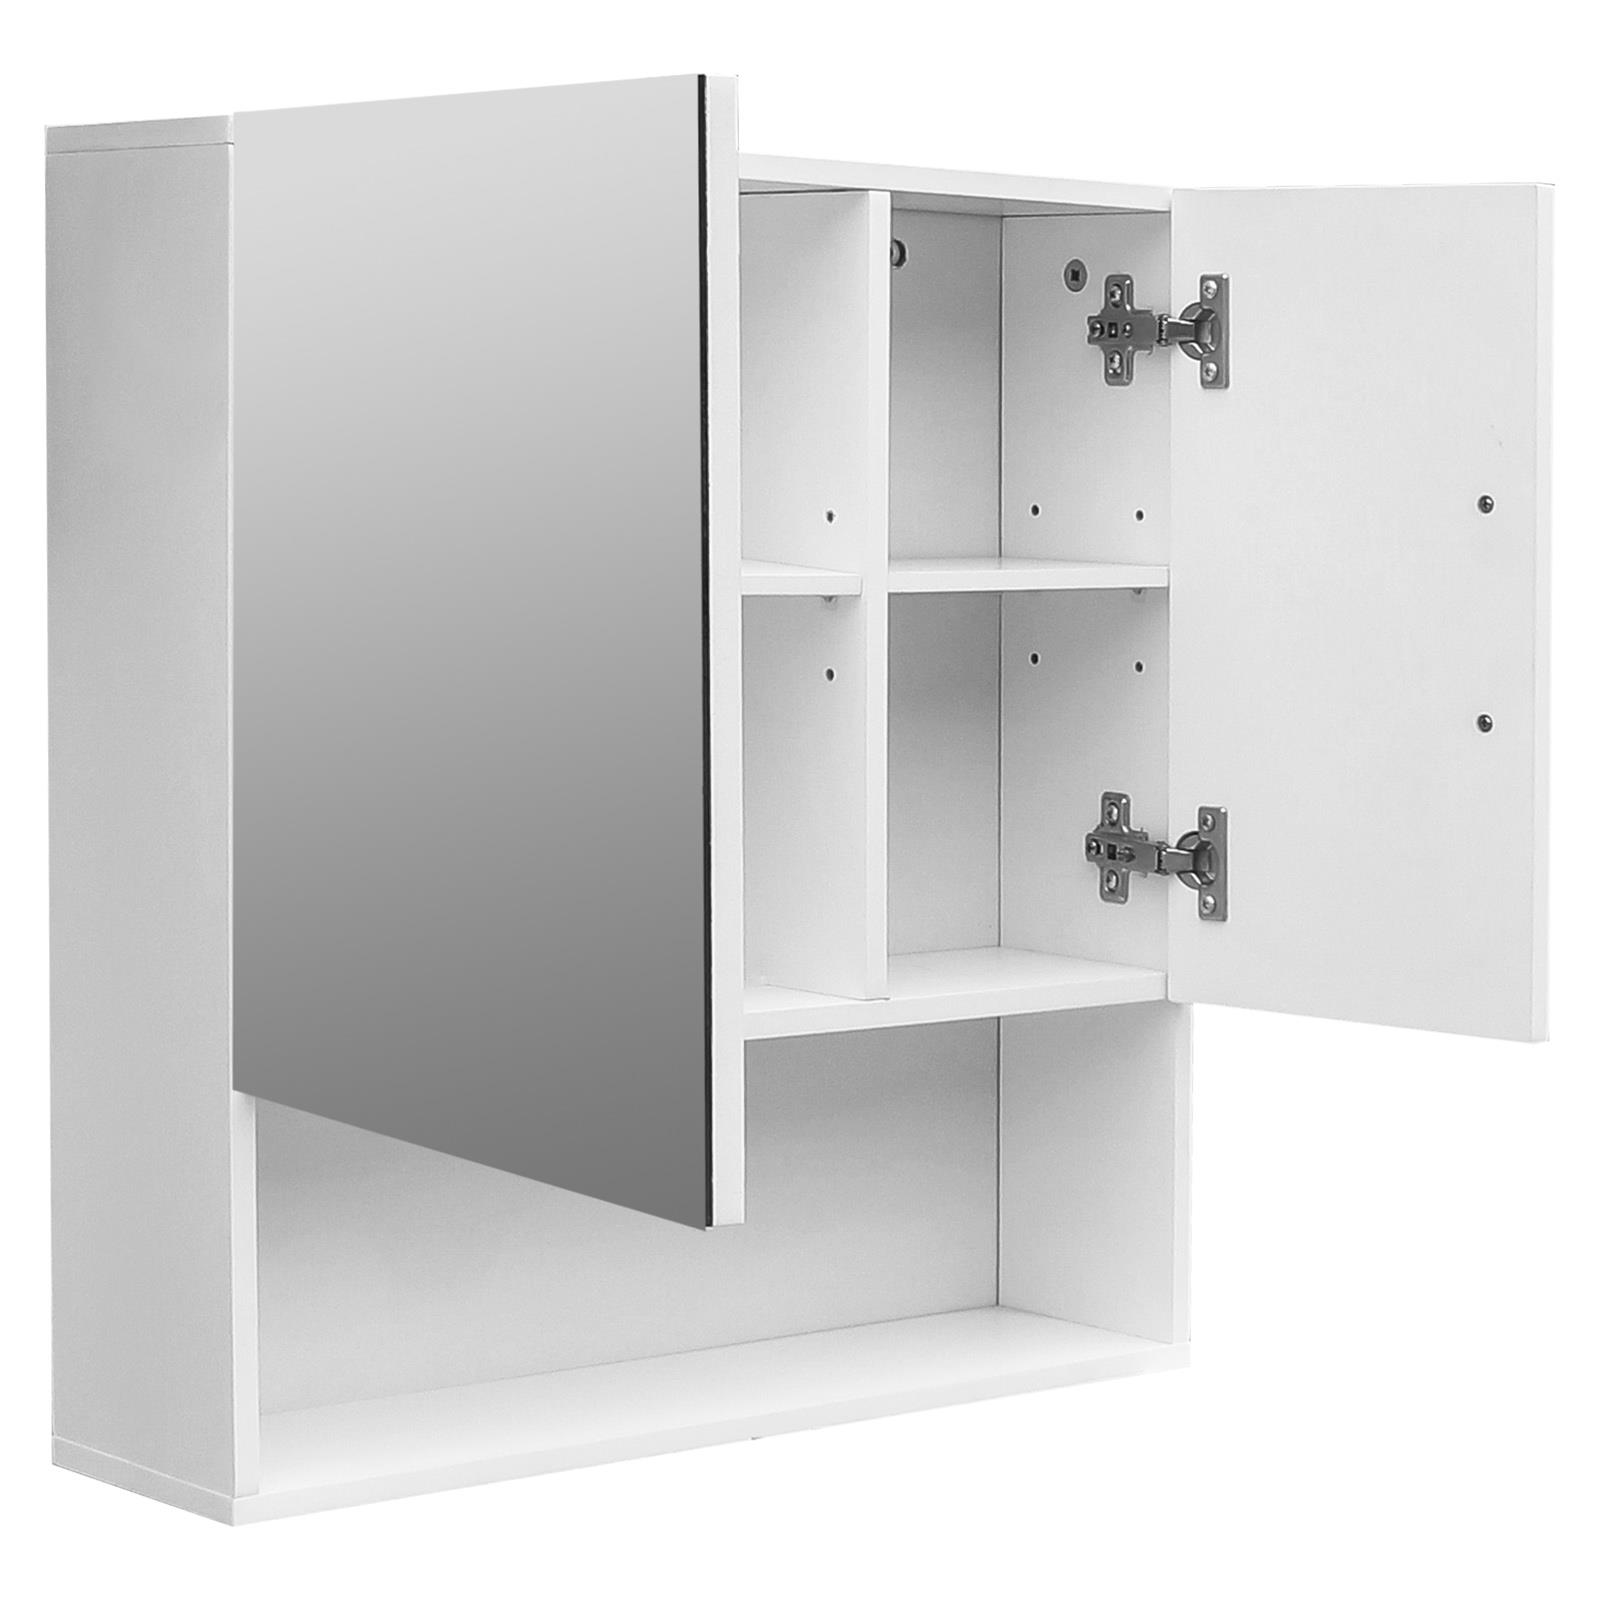 SalonMore Mirror Cabinet, Mirrored Storage Wall Cabinet, Wall Mounted Medicine Cabinet with Mirror Doors & Shelf Bathroom White - image 1 of 5